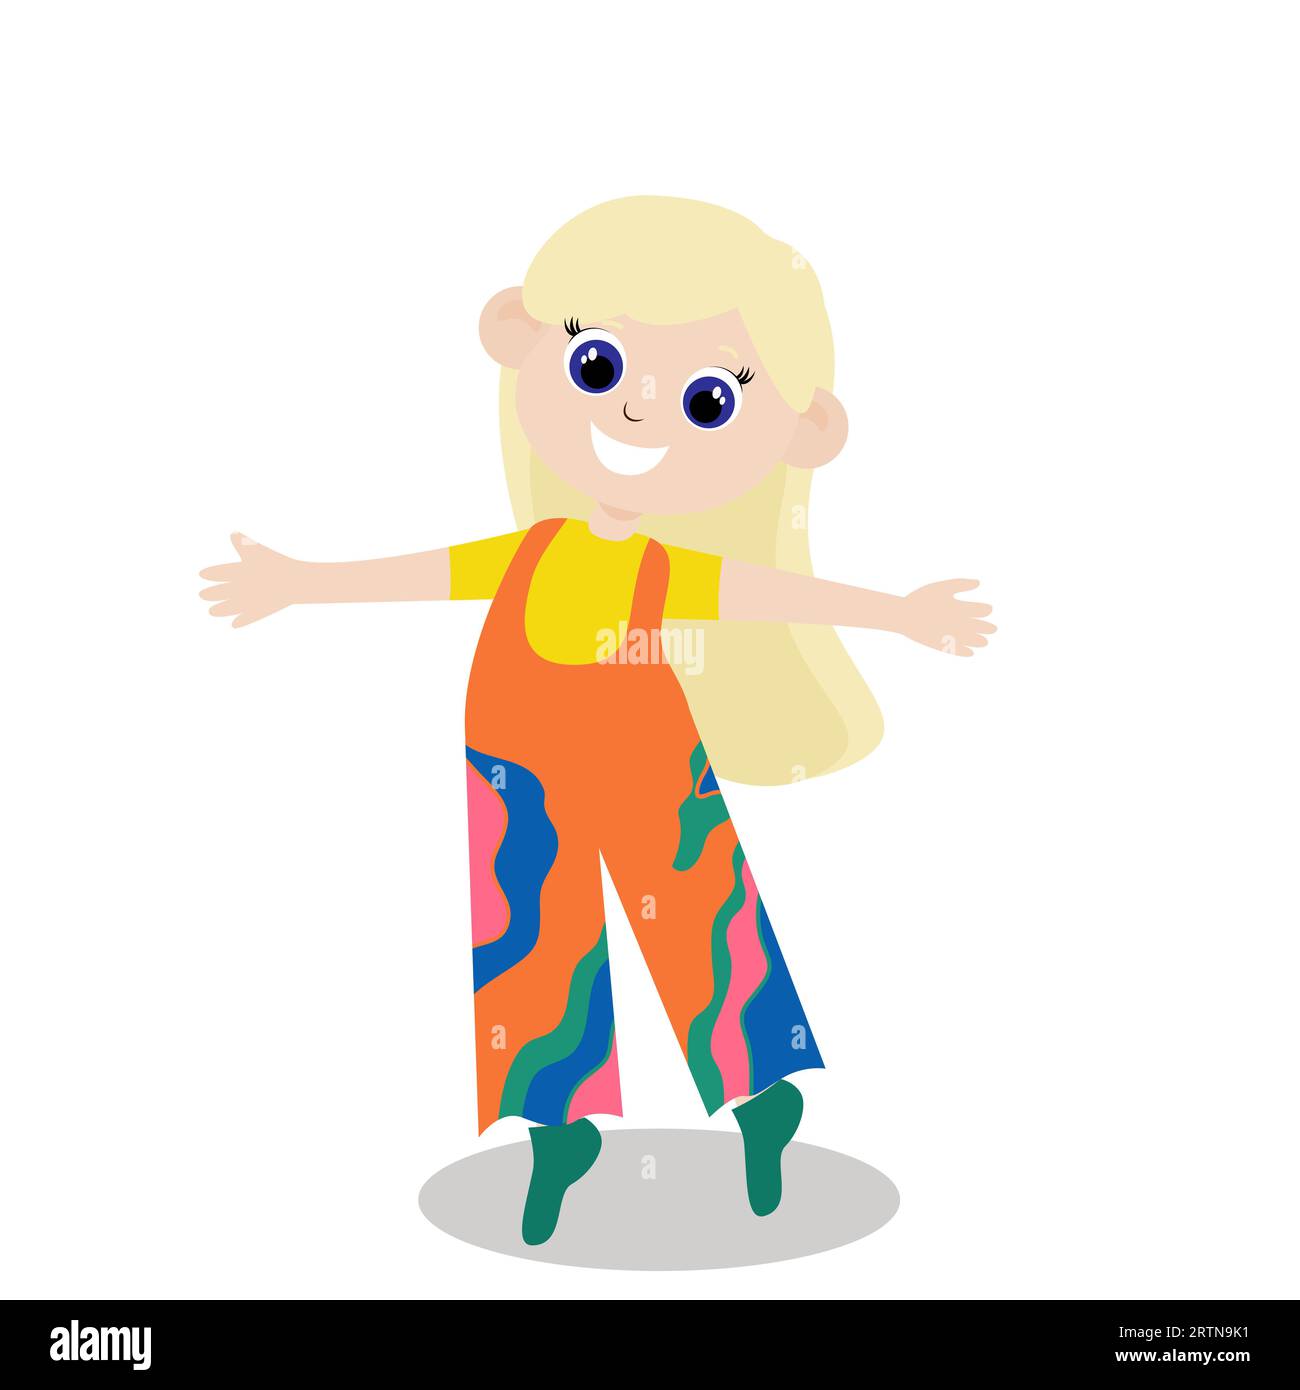 A girl in a wide colored jumpsuit rejoices and stands with her arms outstretched. The child is happy and fashionably dressed. Character design. Stock Vector